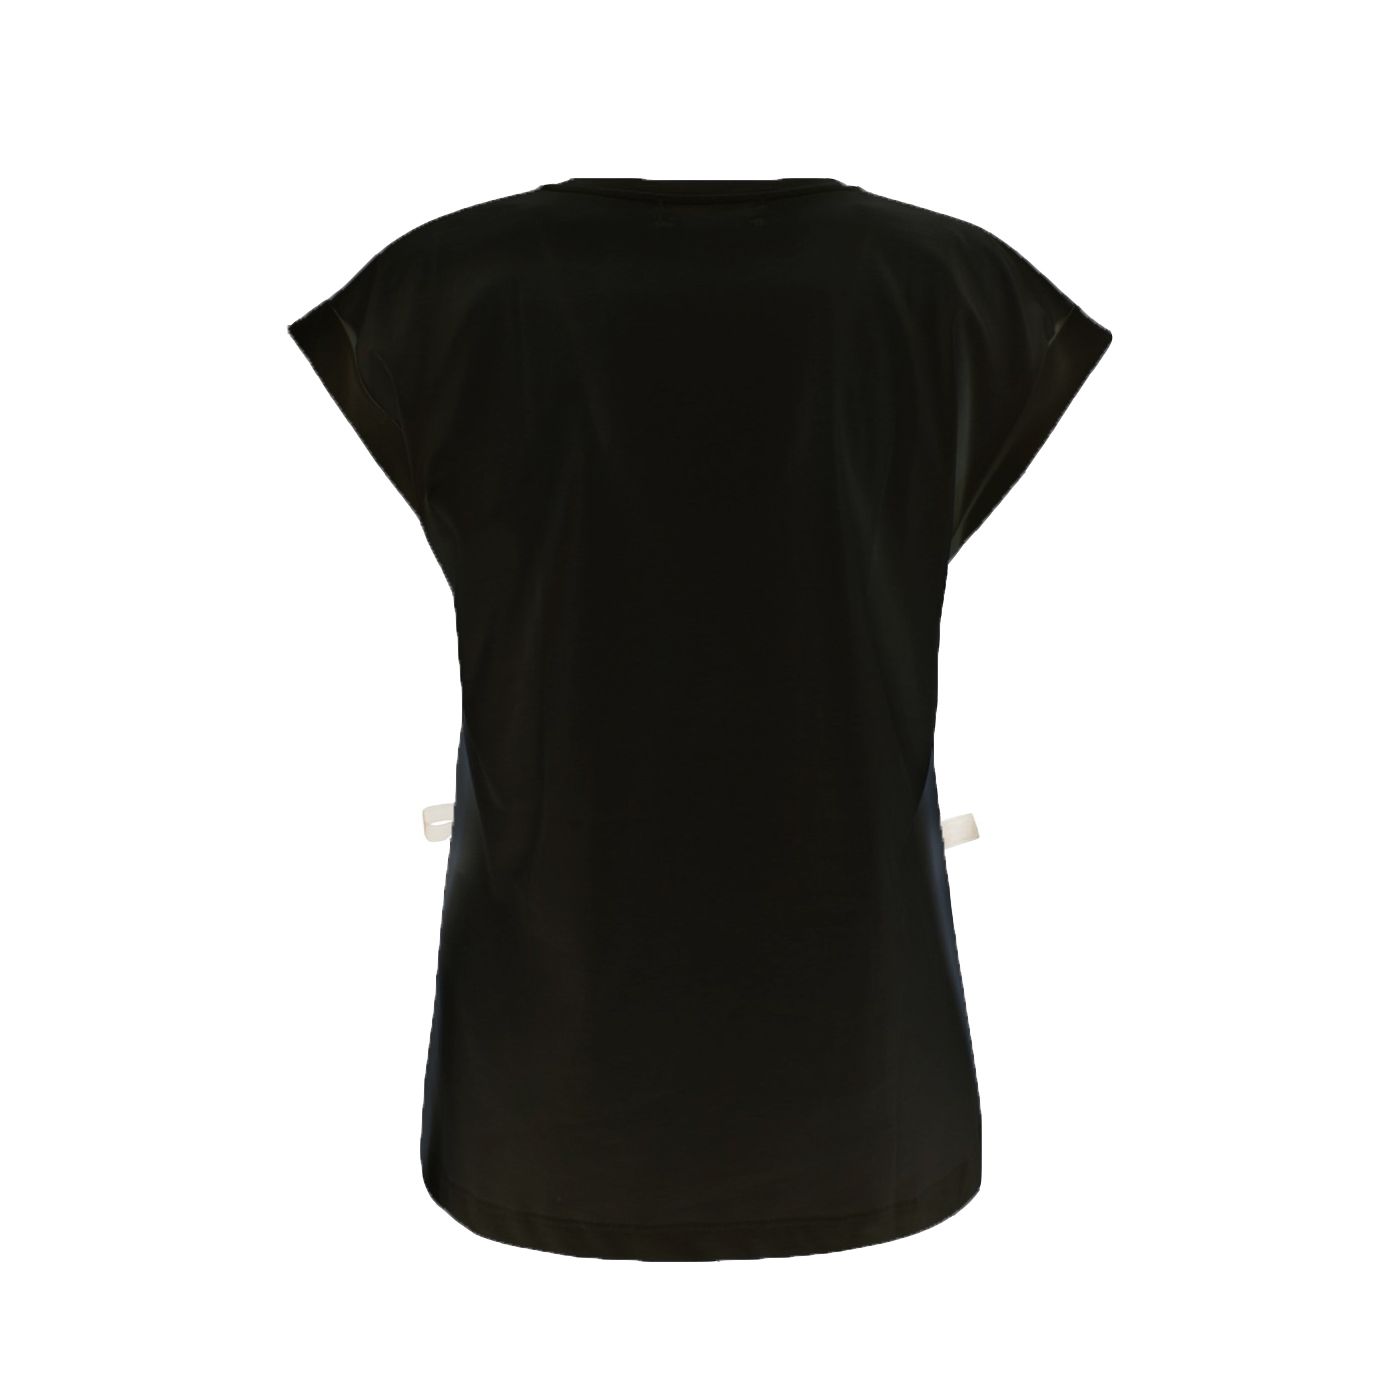 Chic Black Jersey with Dazzling Details